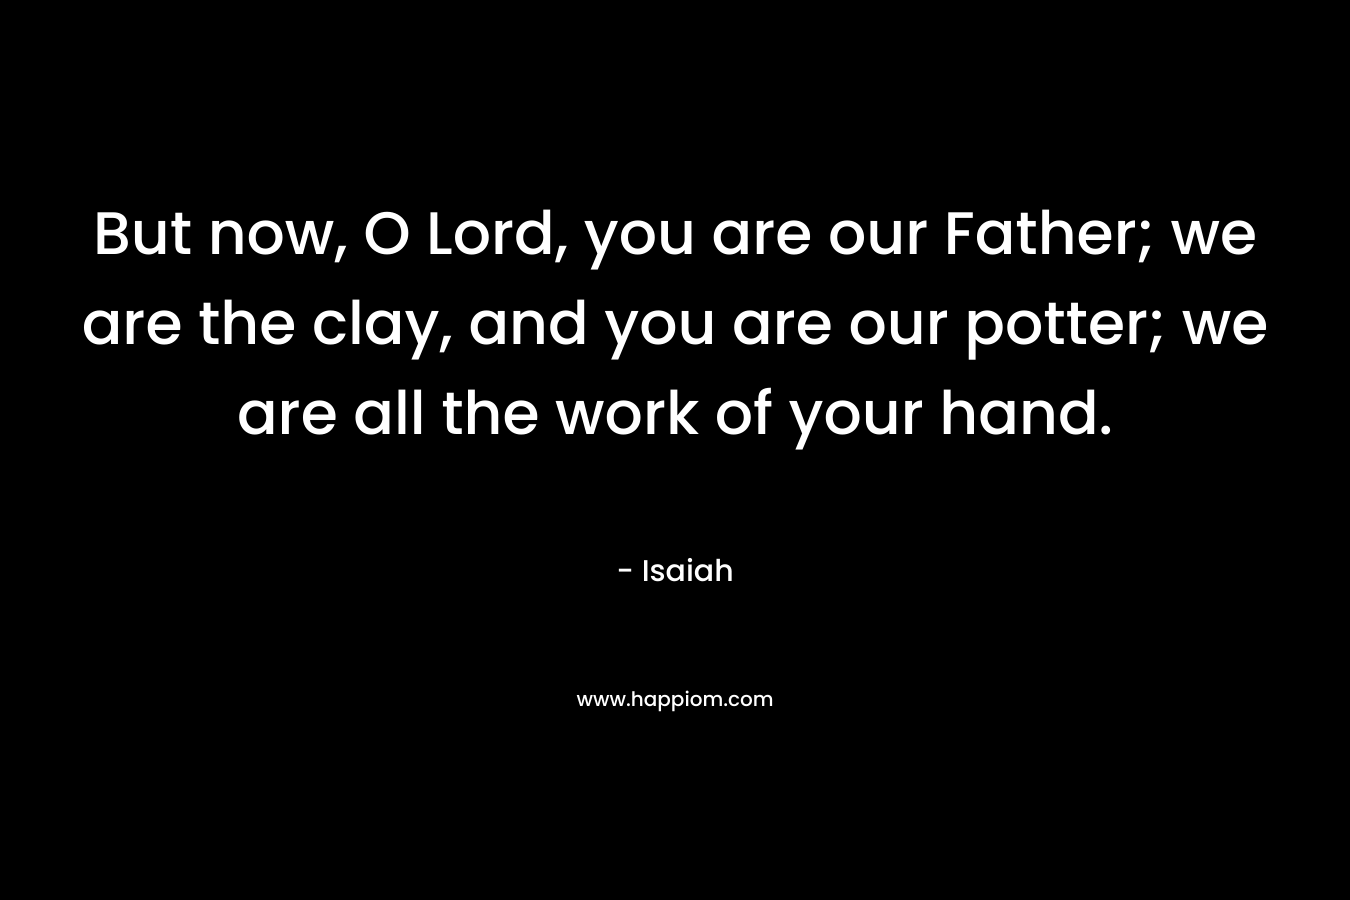 But now, O Lord, you are our Father; we are the clay, and you are our potter; we are all the work of your hand.